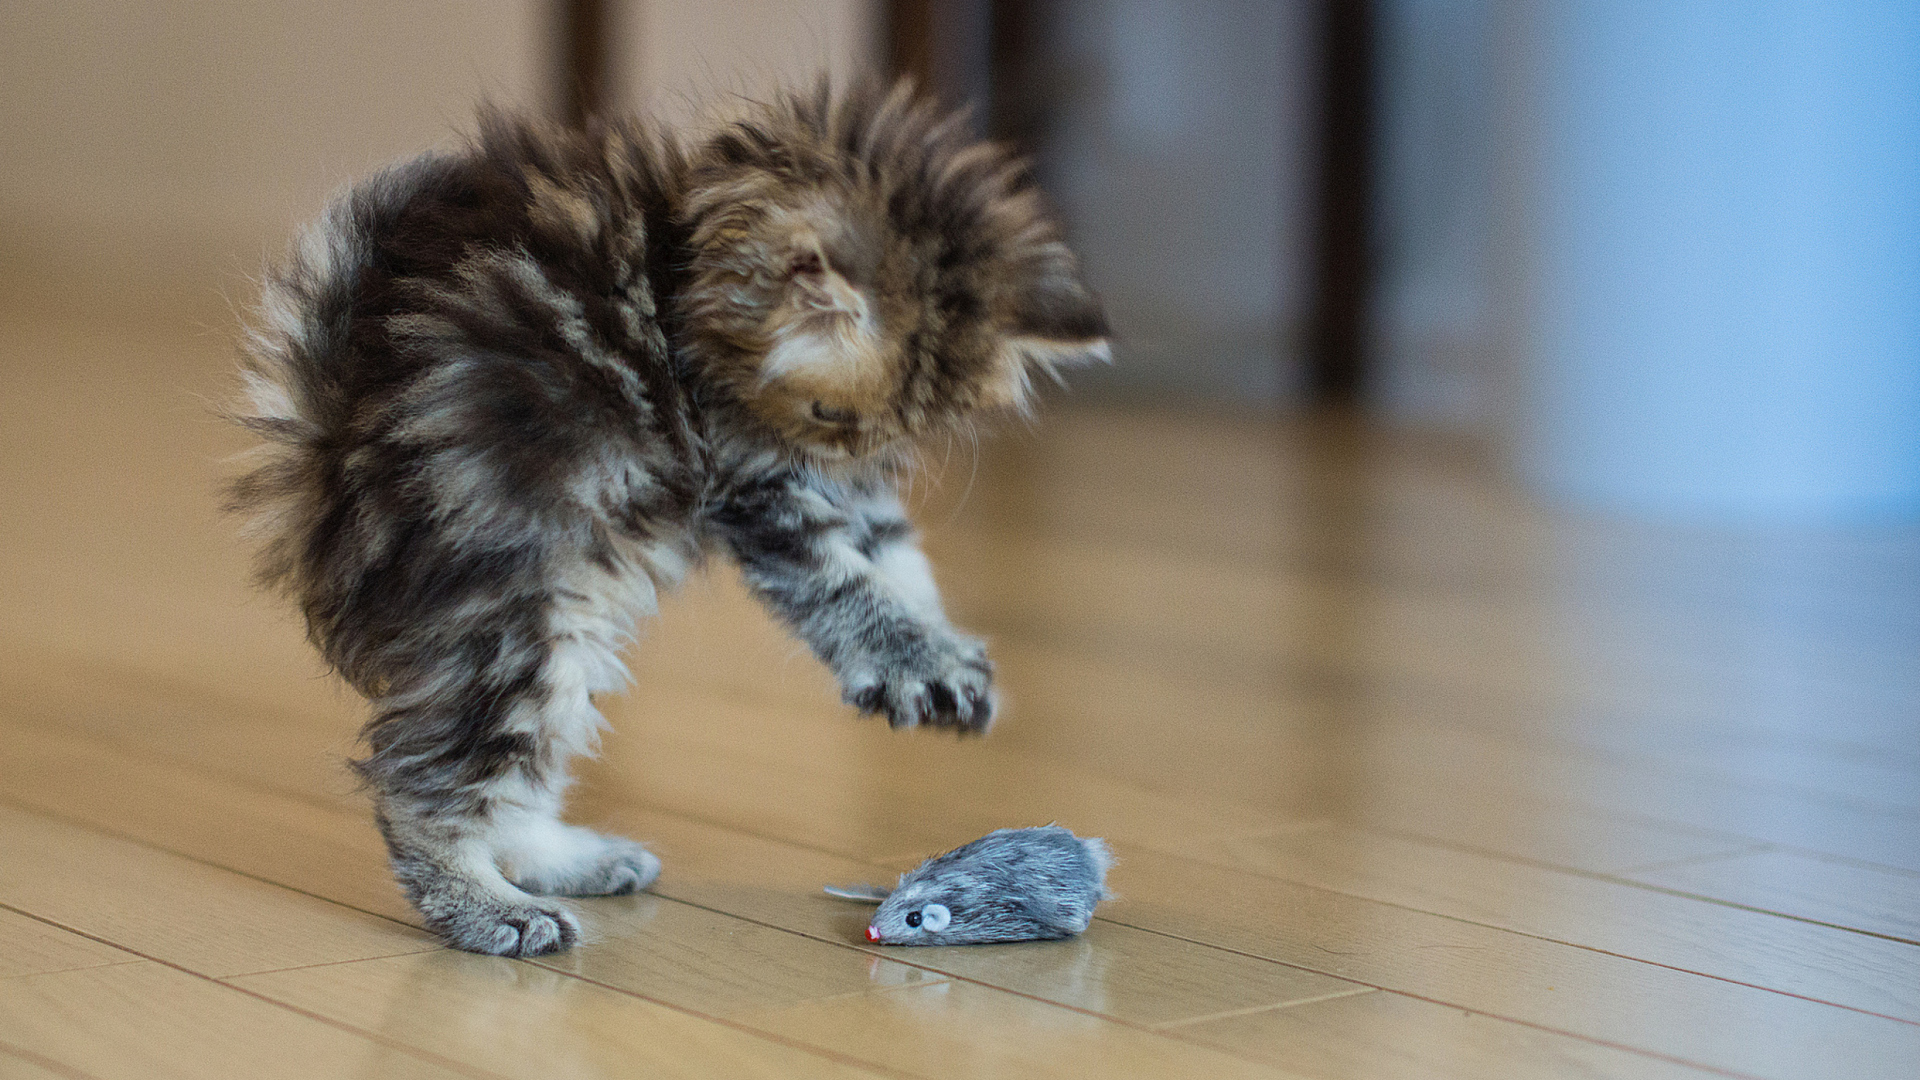 Funny Kitten Playing With Toy Mouse wallpaper 1920x1080